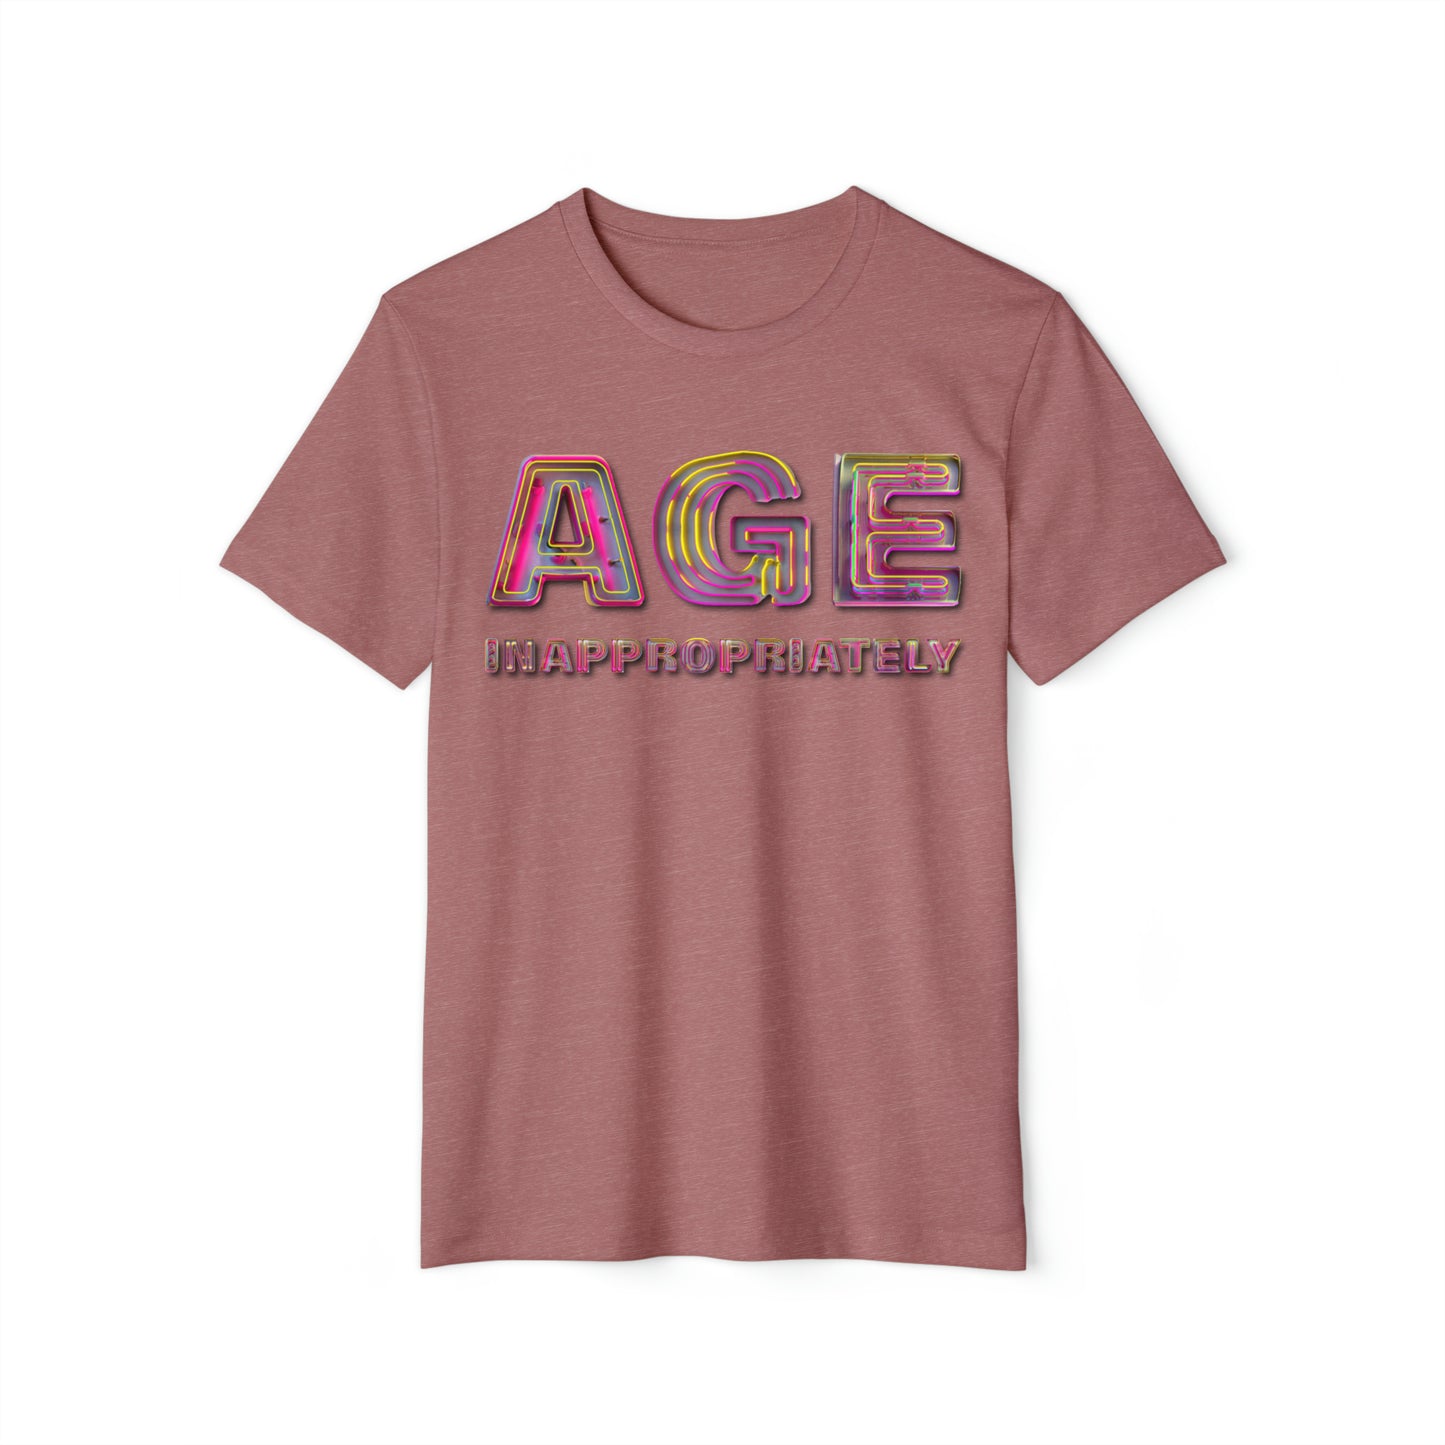 Age Inappropriately Unisex Recycled Organic T-Shirt